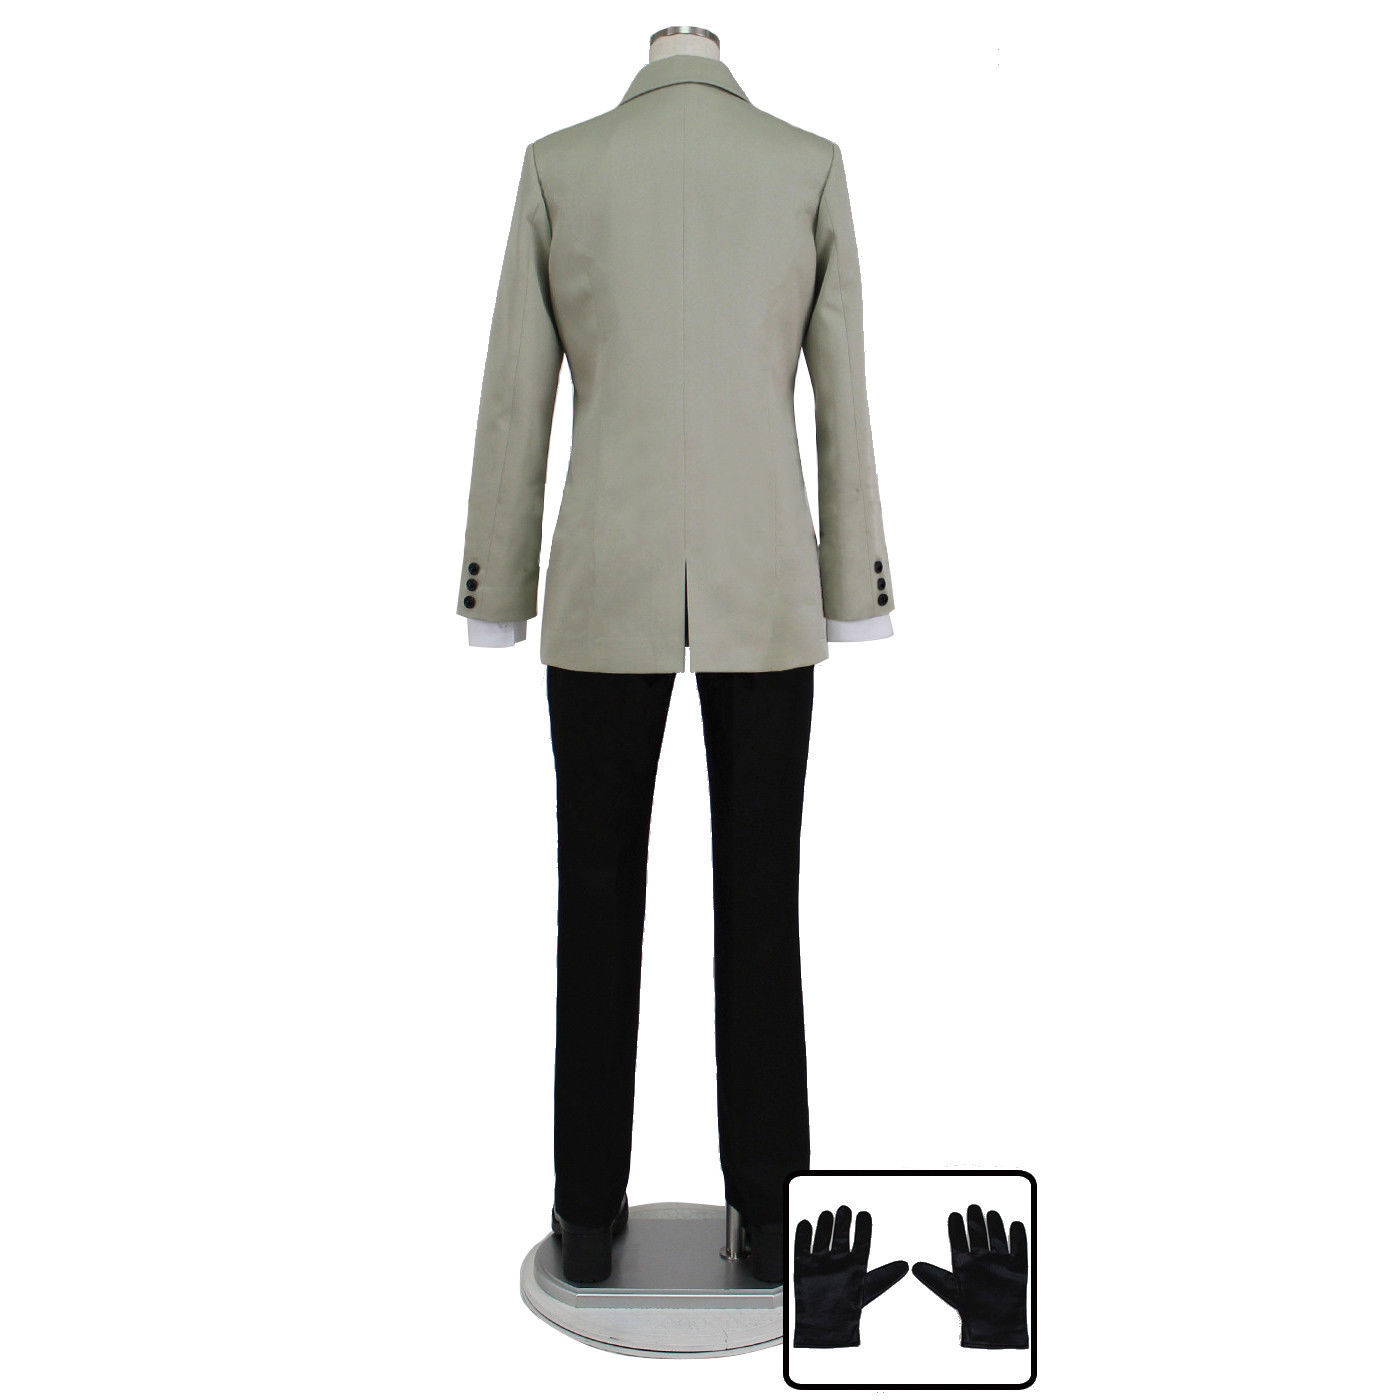 Persona 5 P5 Goro Akechi School Uniform Suit Cosplay Costume Outfit ...